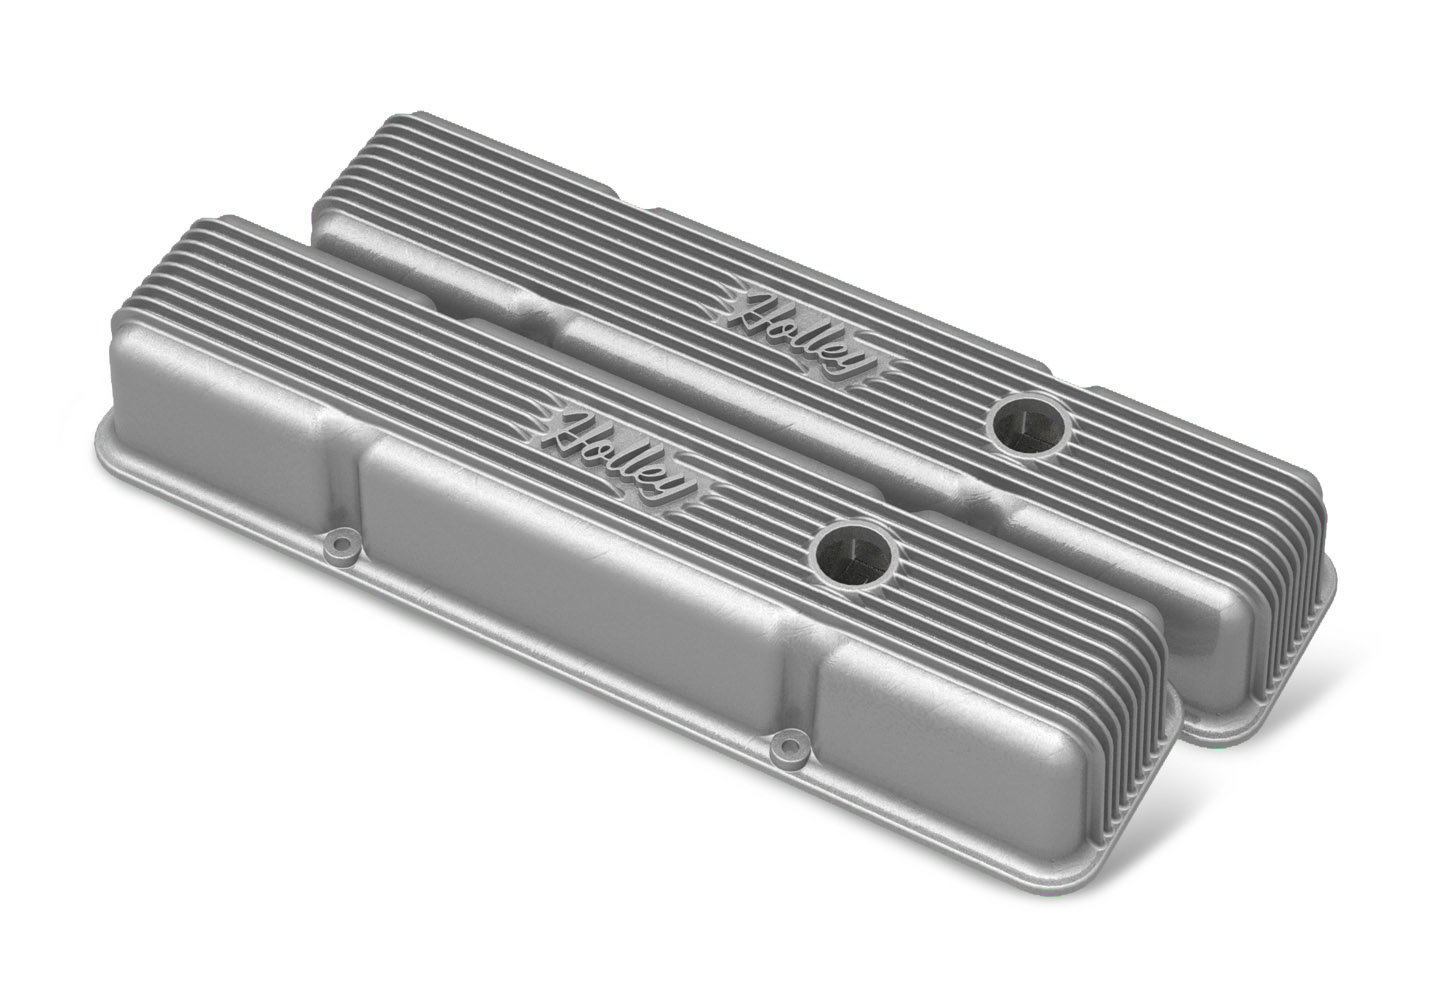 Holley Vintage Series Valve Covers for Small Block Chevy, Polished Finish